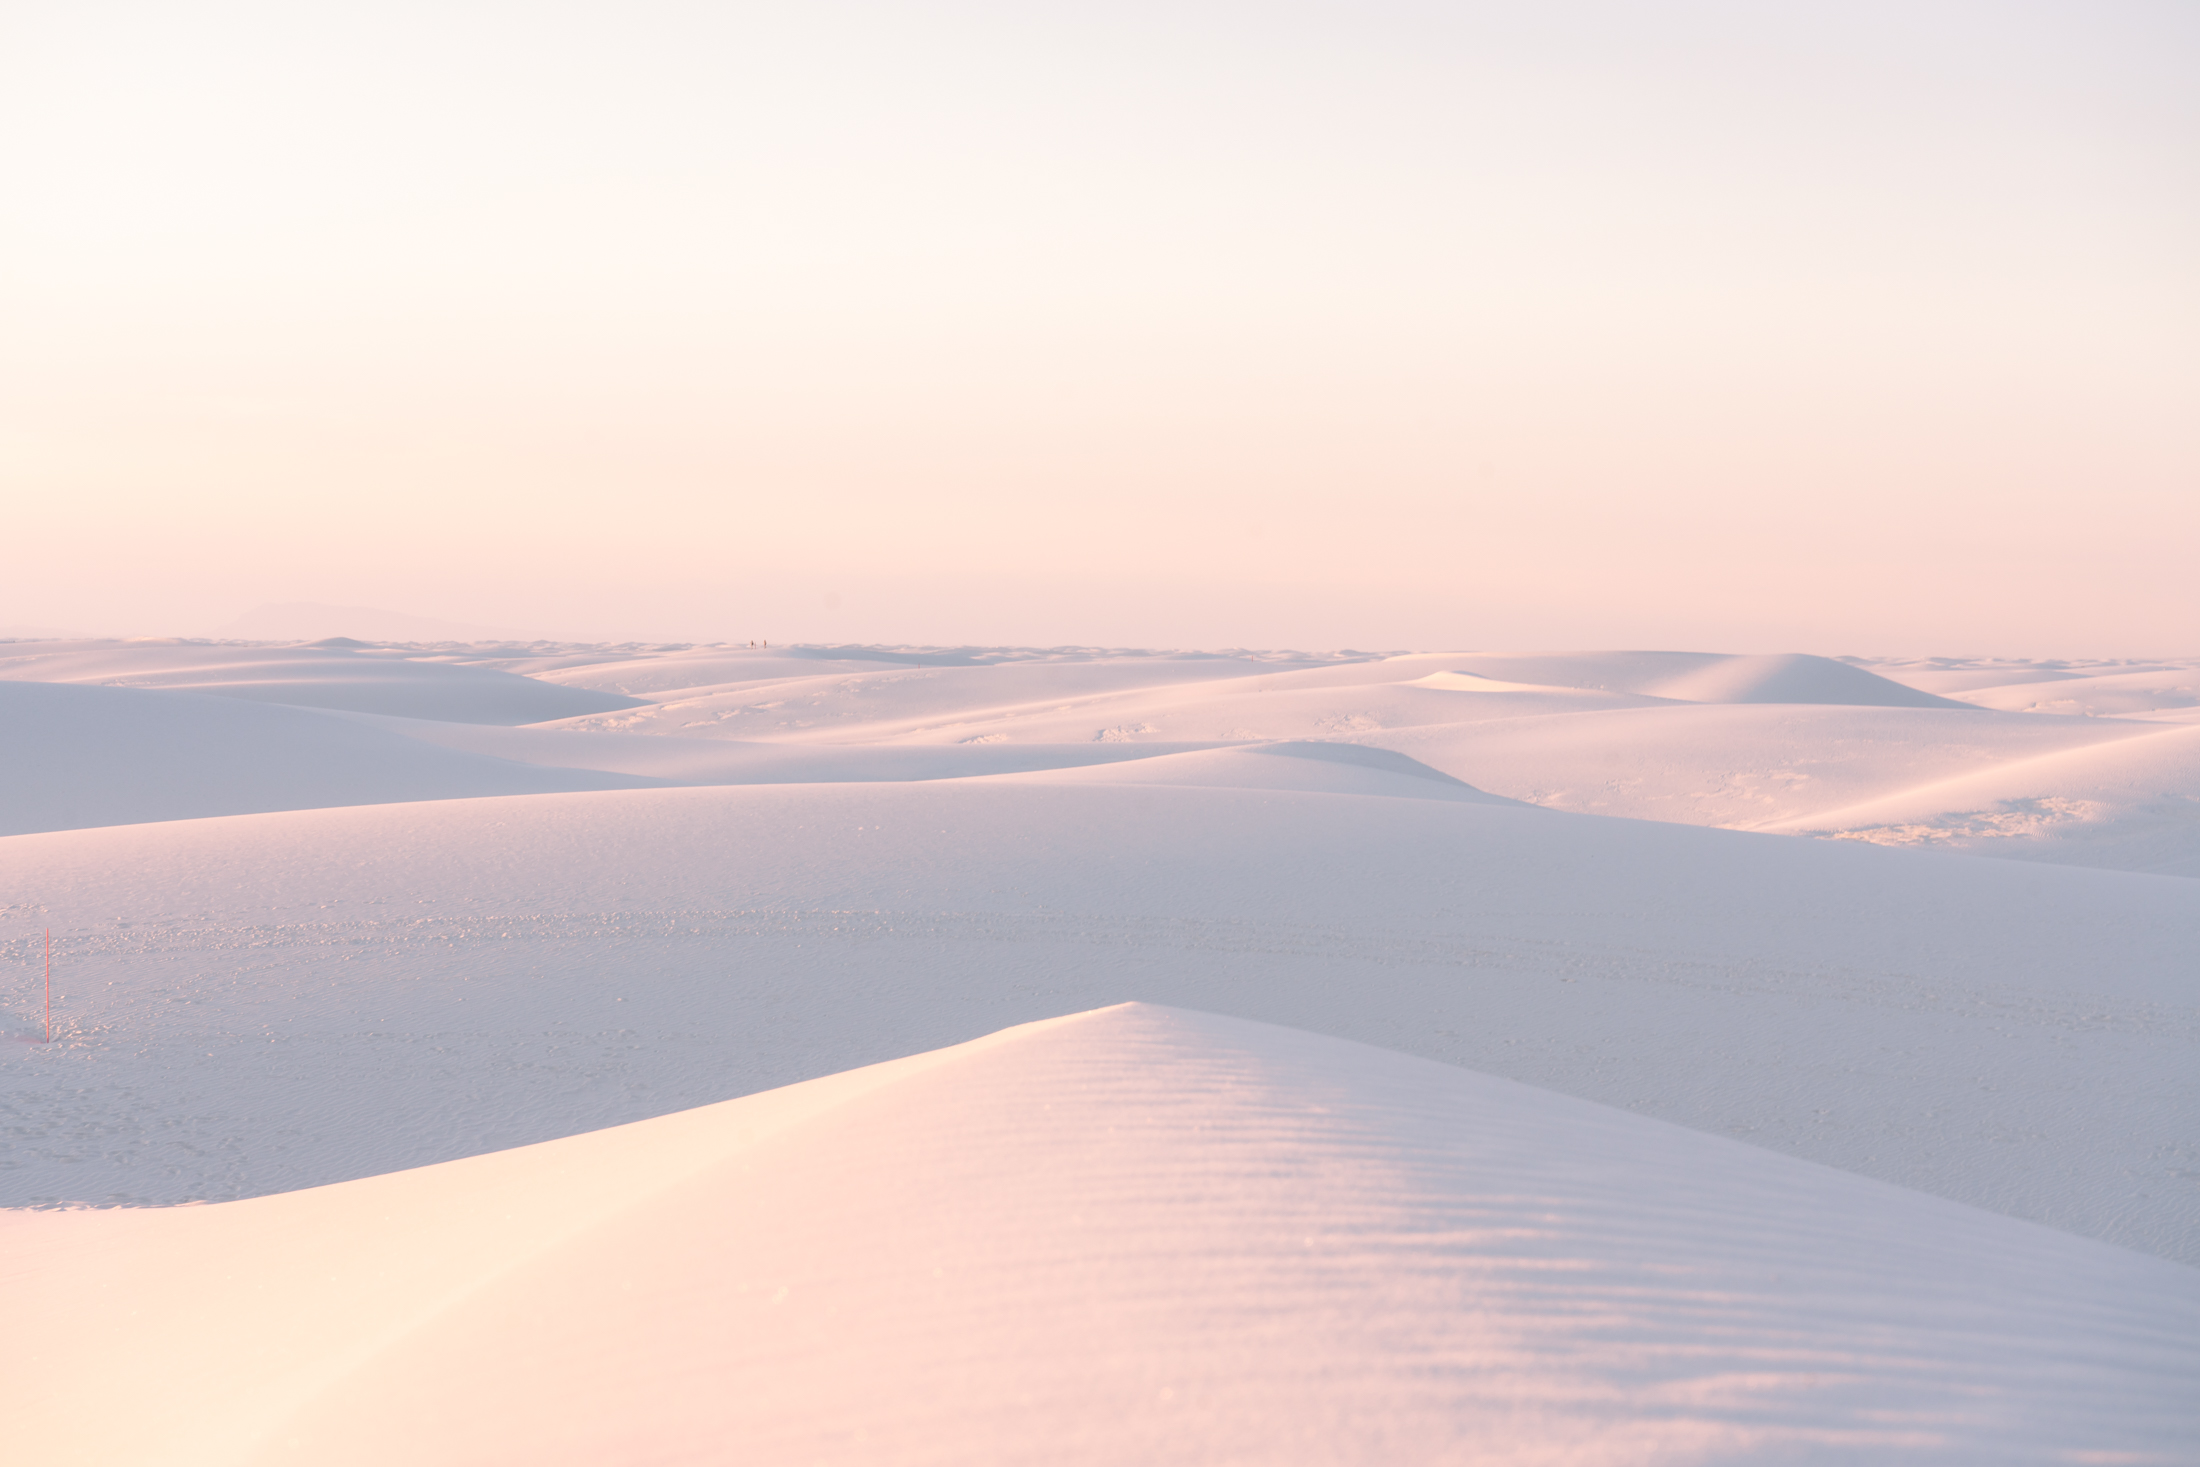 white sands national park new mexico